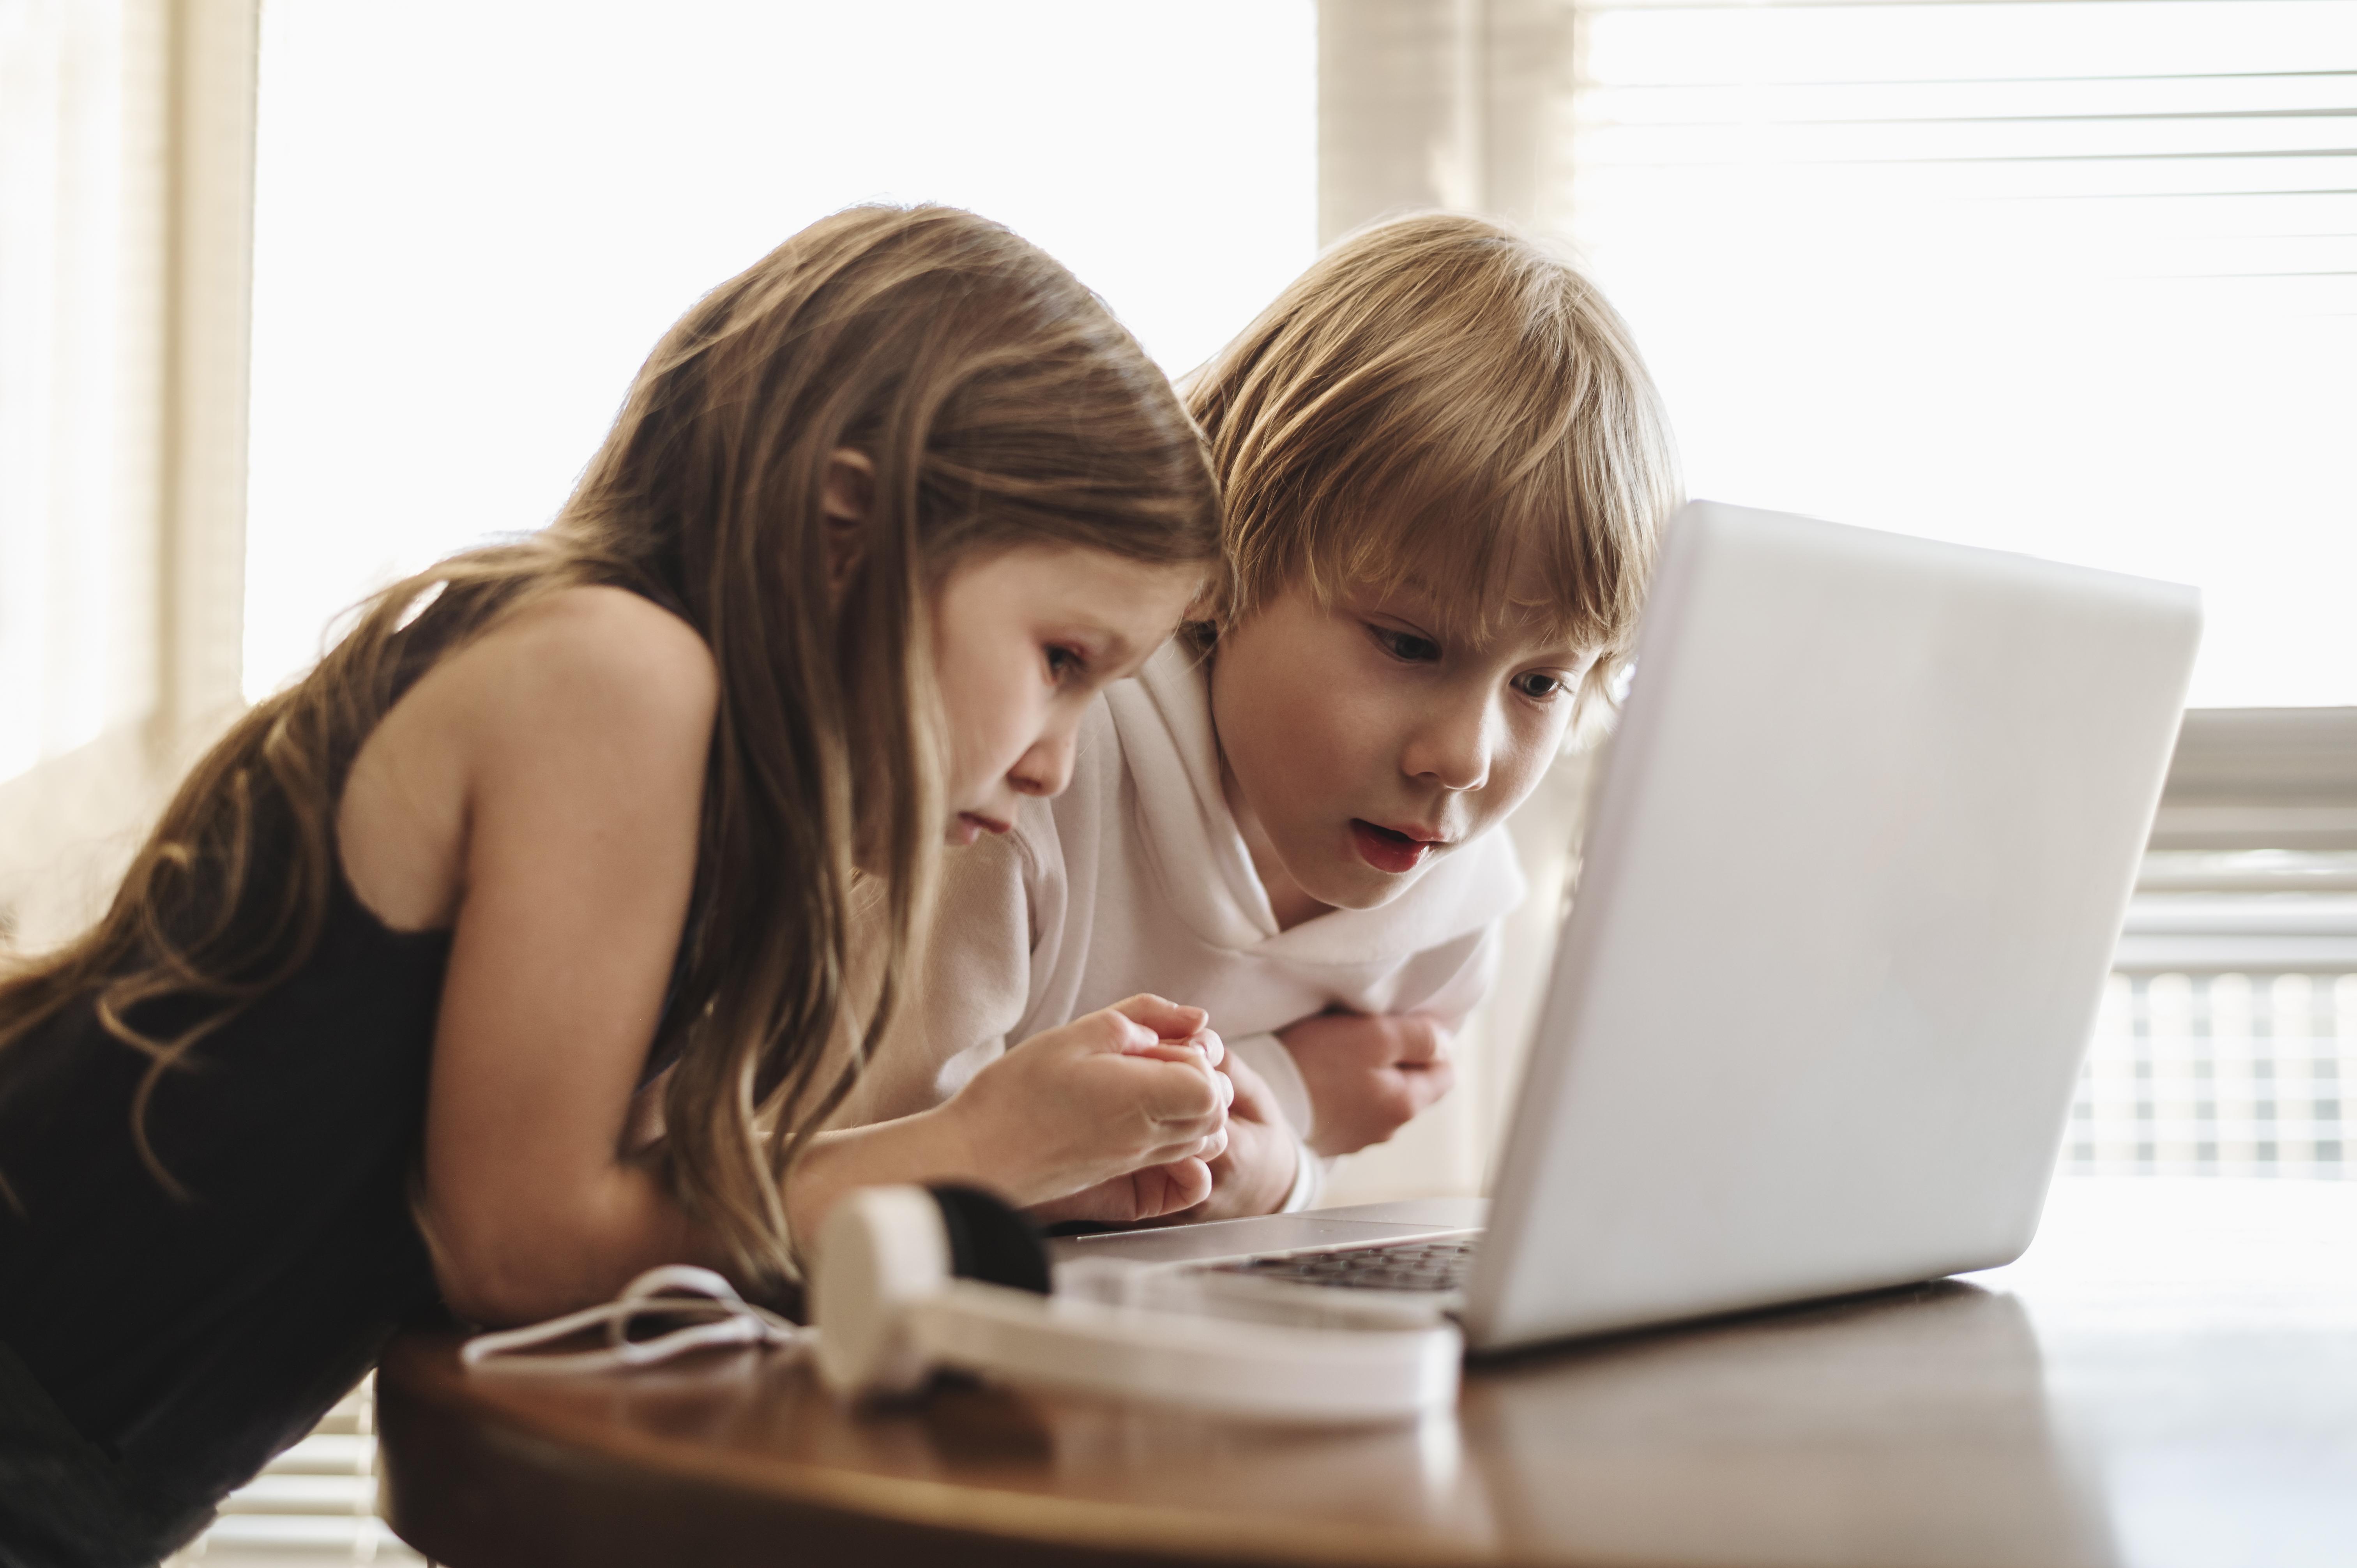 side-view-kids-using-laptop-together